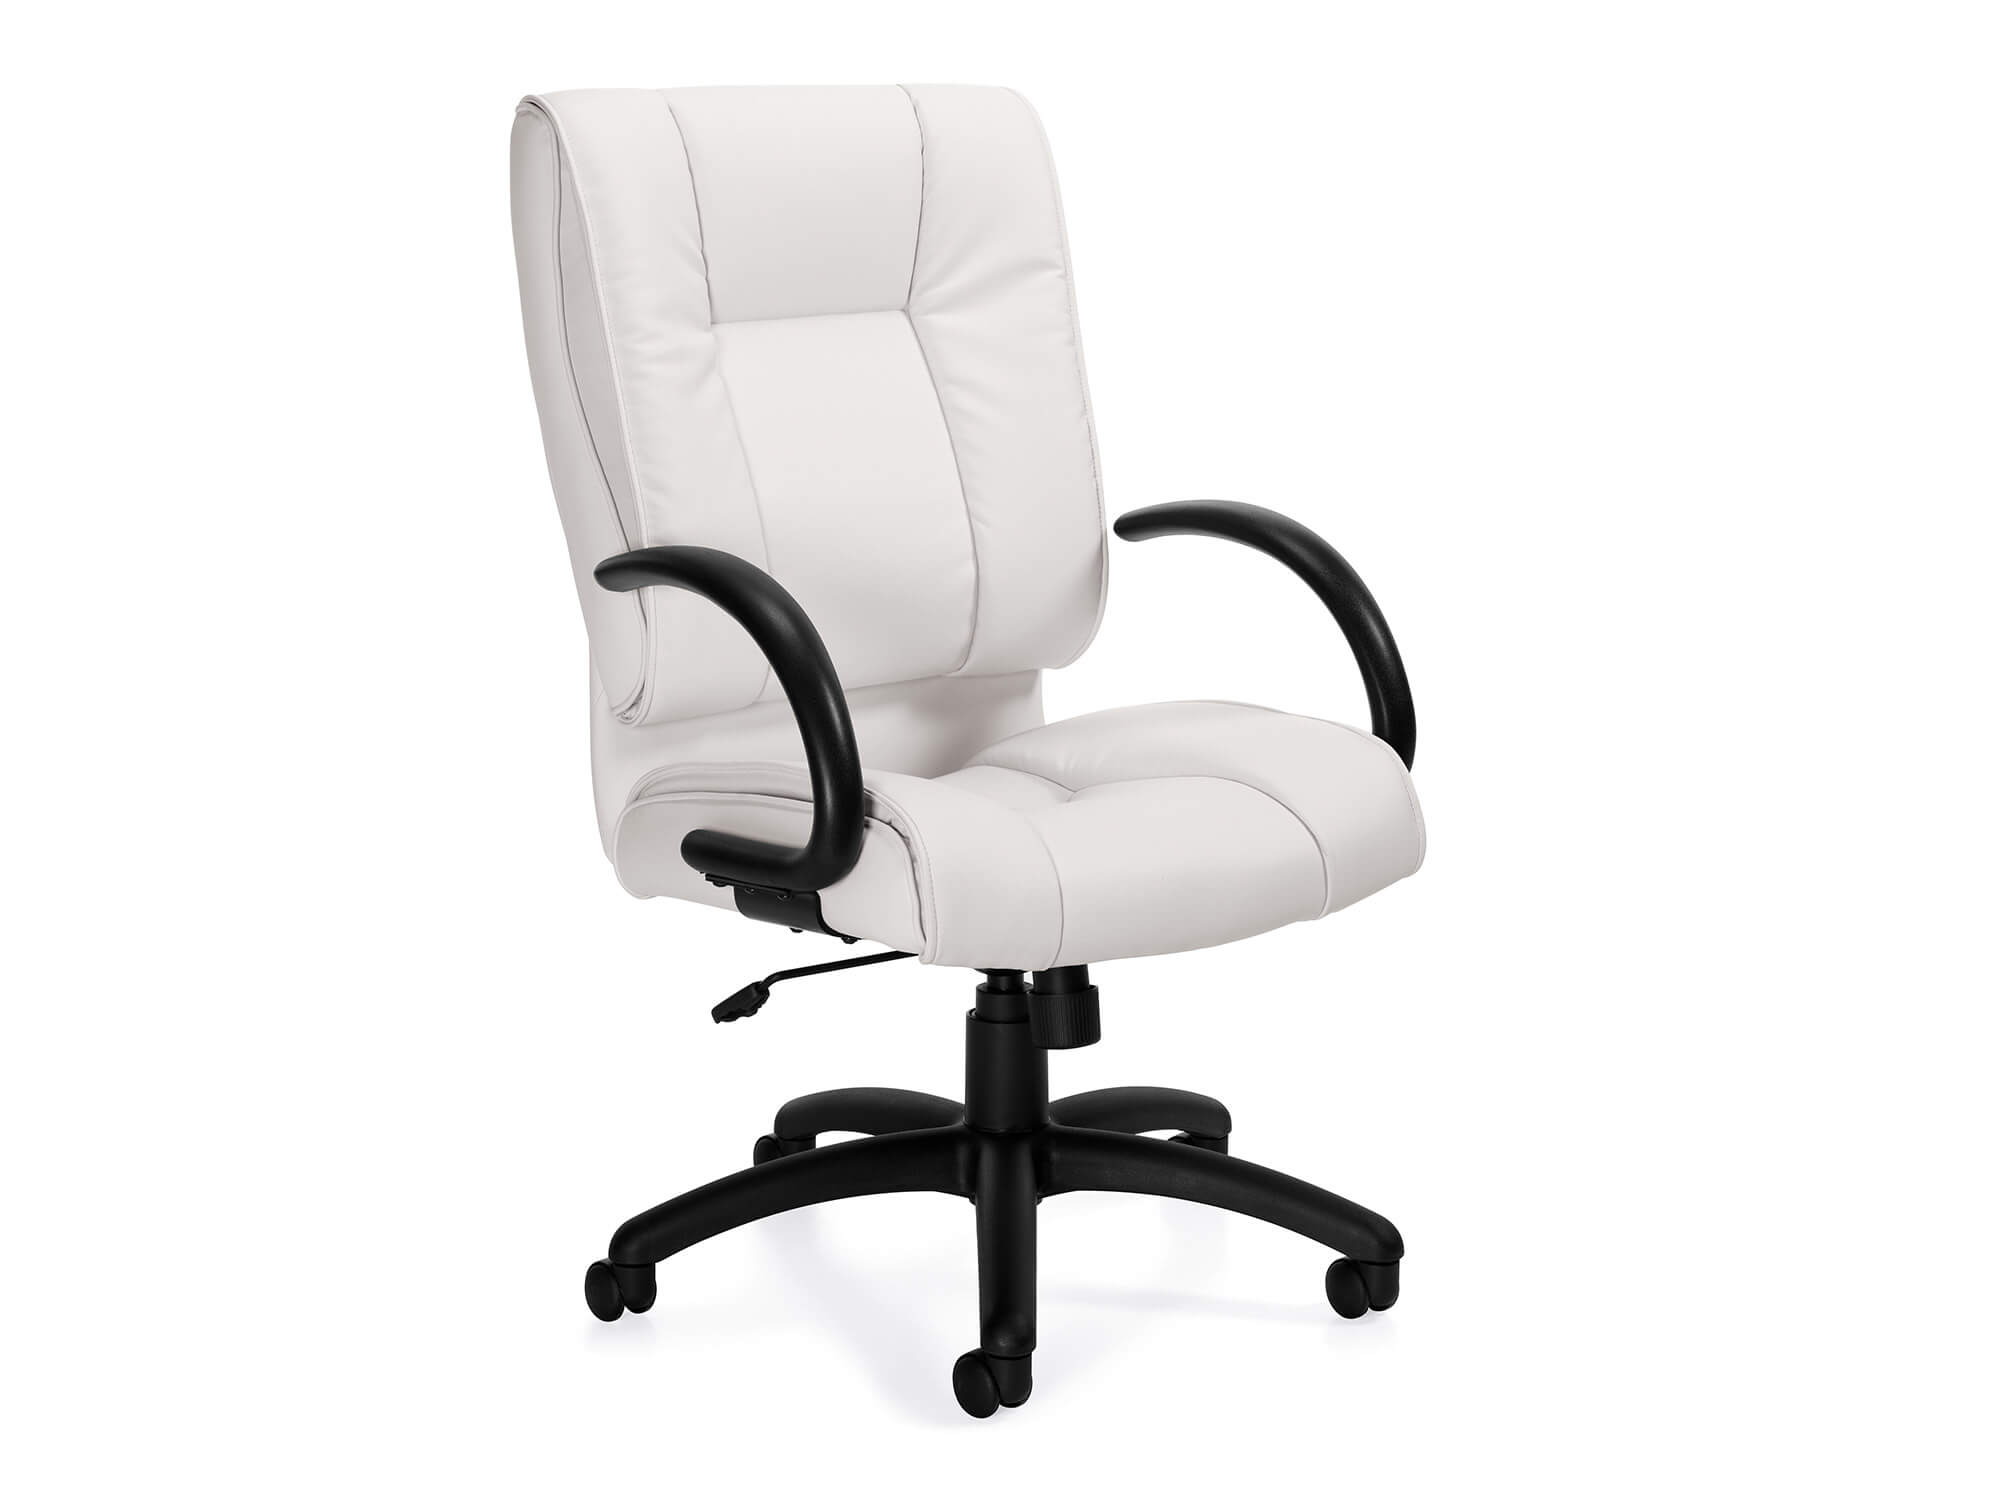 chairs-for-office-leather-office-chair.jpg